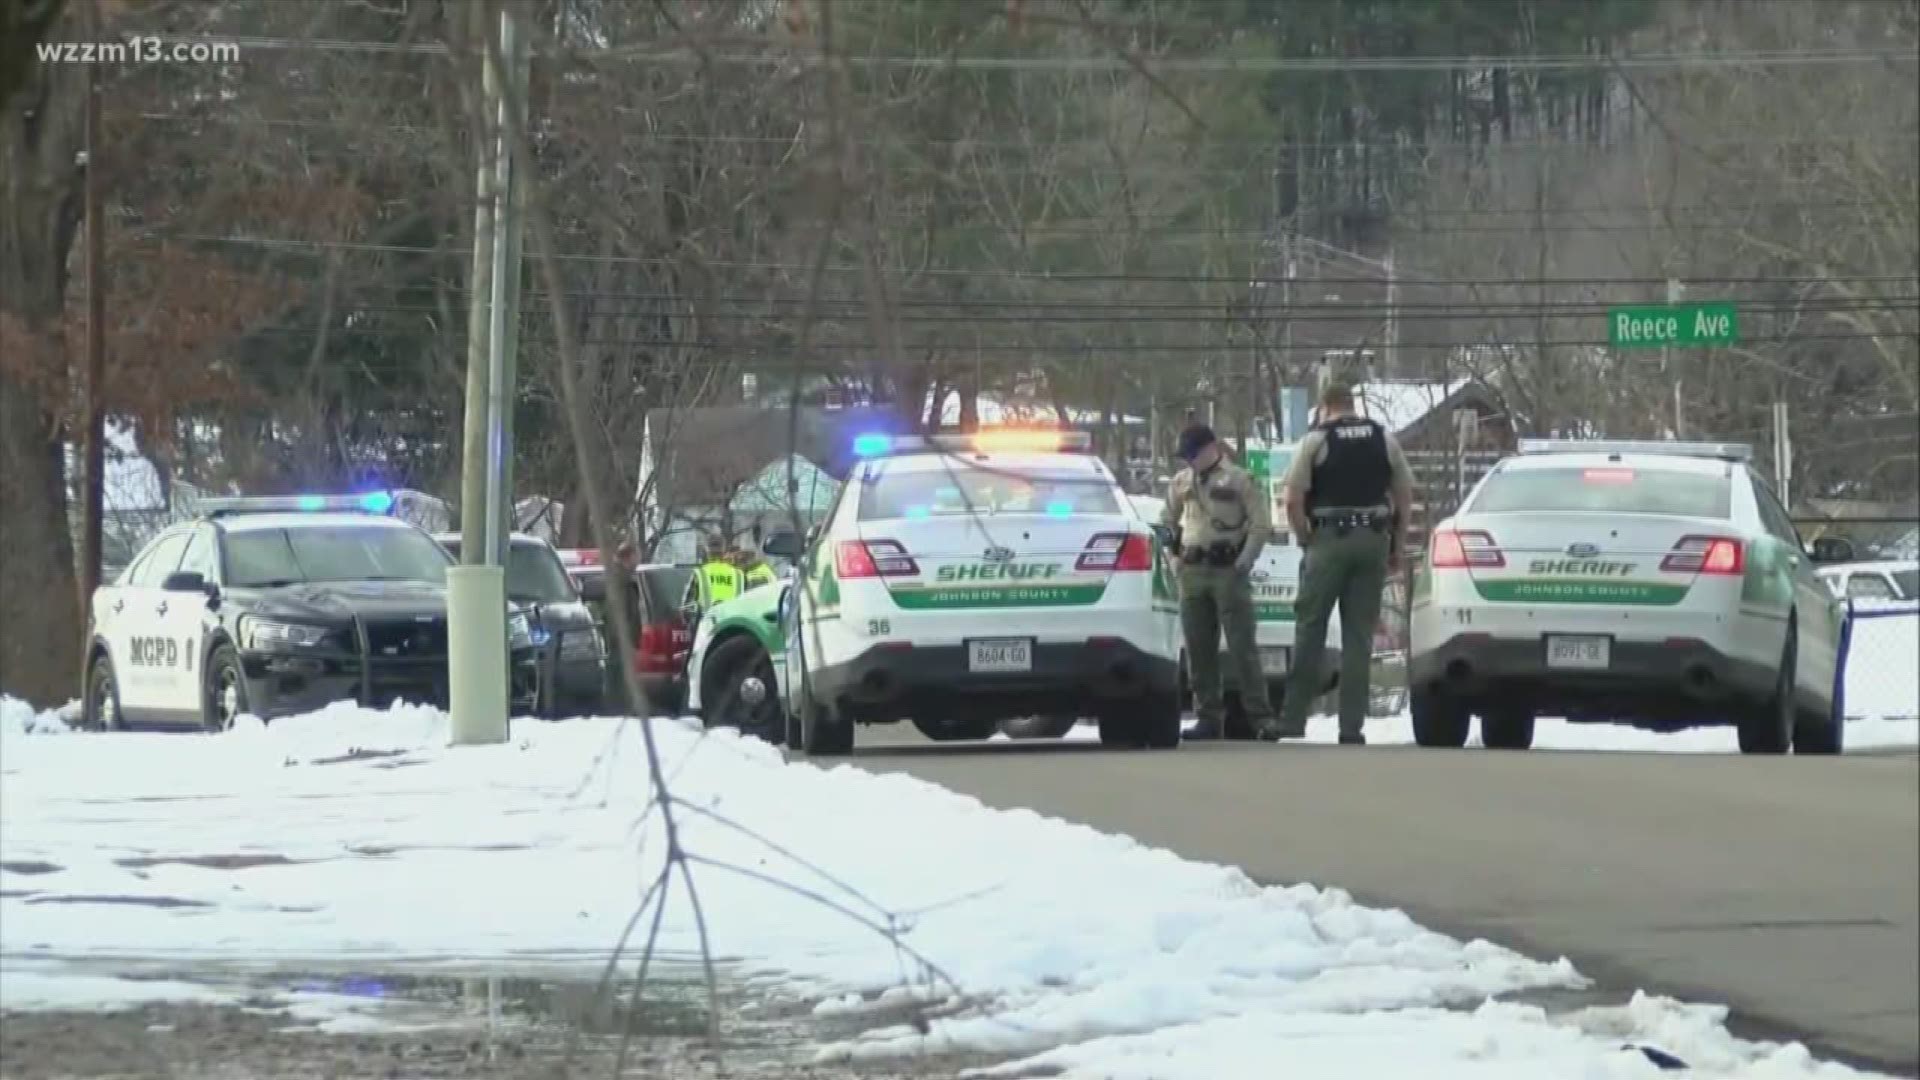 Bomb threat hoax in Grand Rapids and across the country